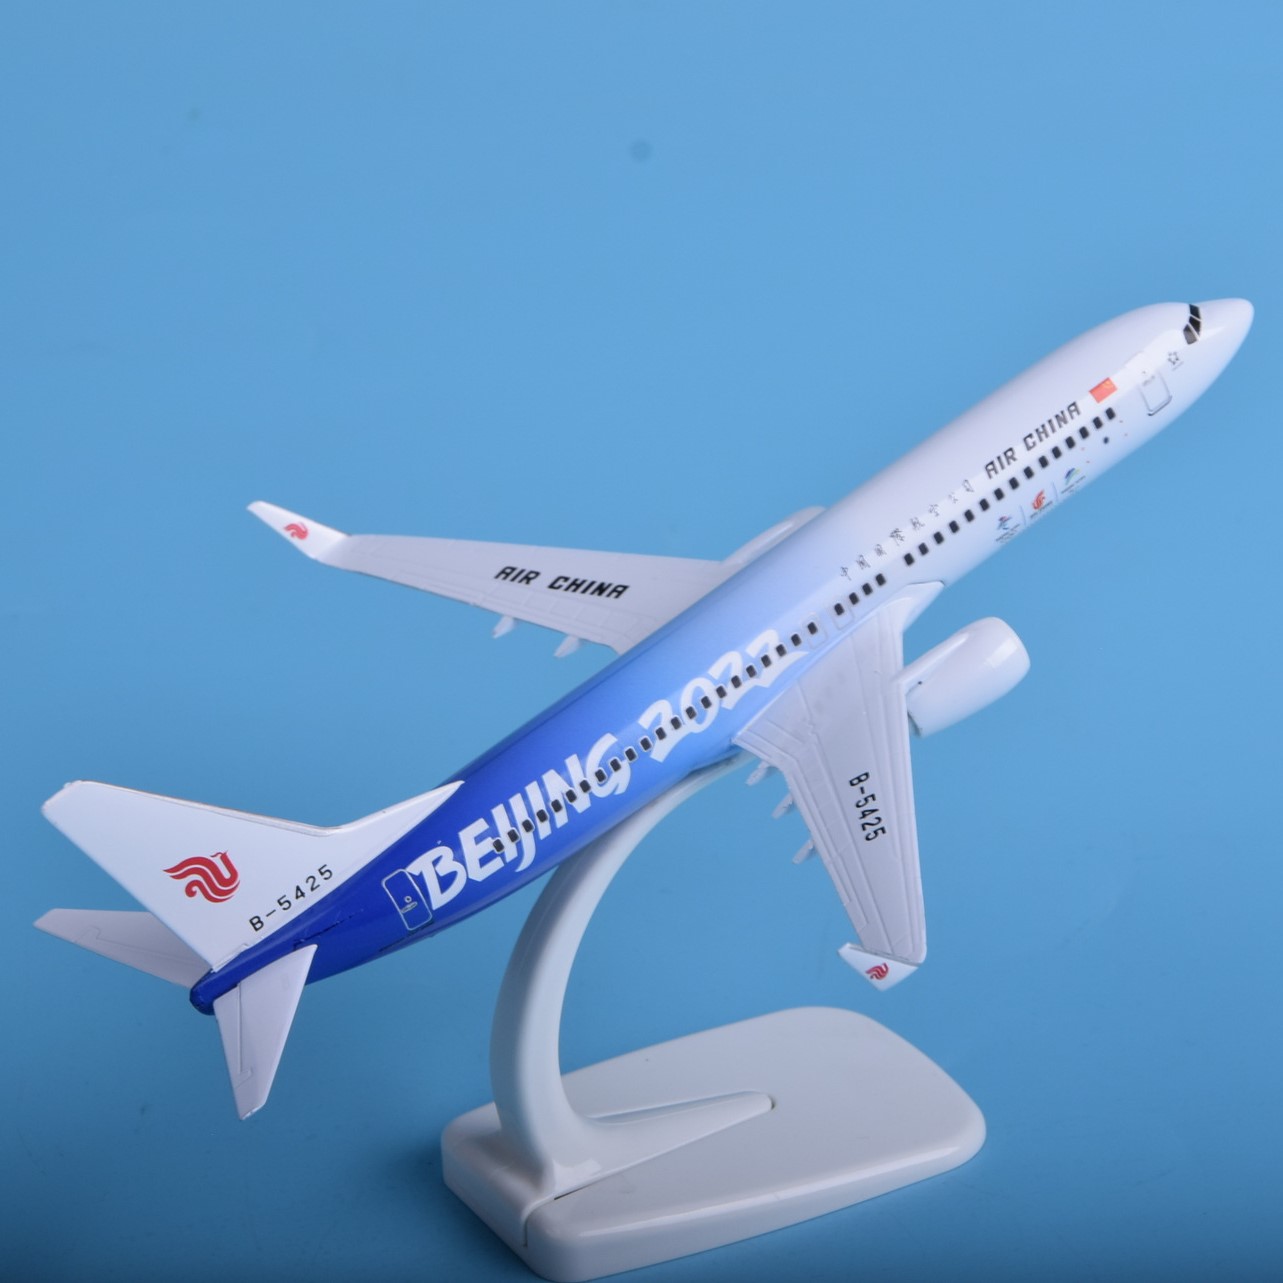 TN-0052 Promotional BOEING 737 Airplane Model